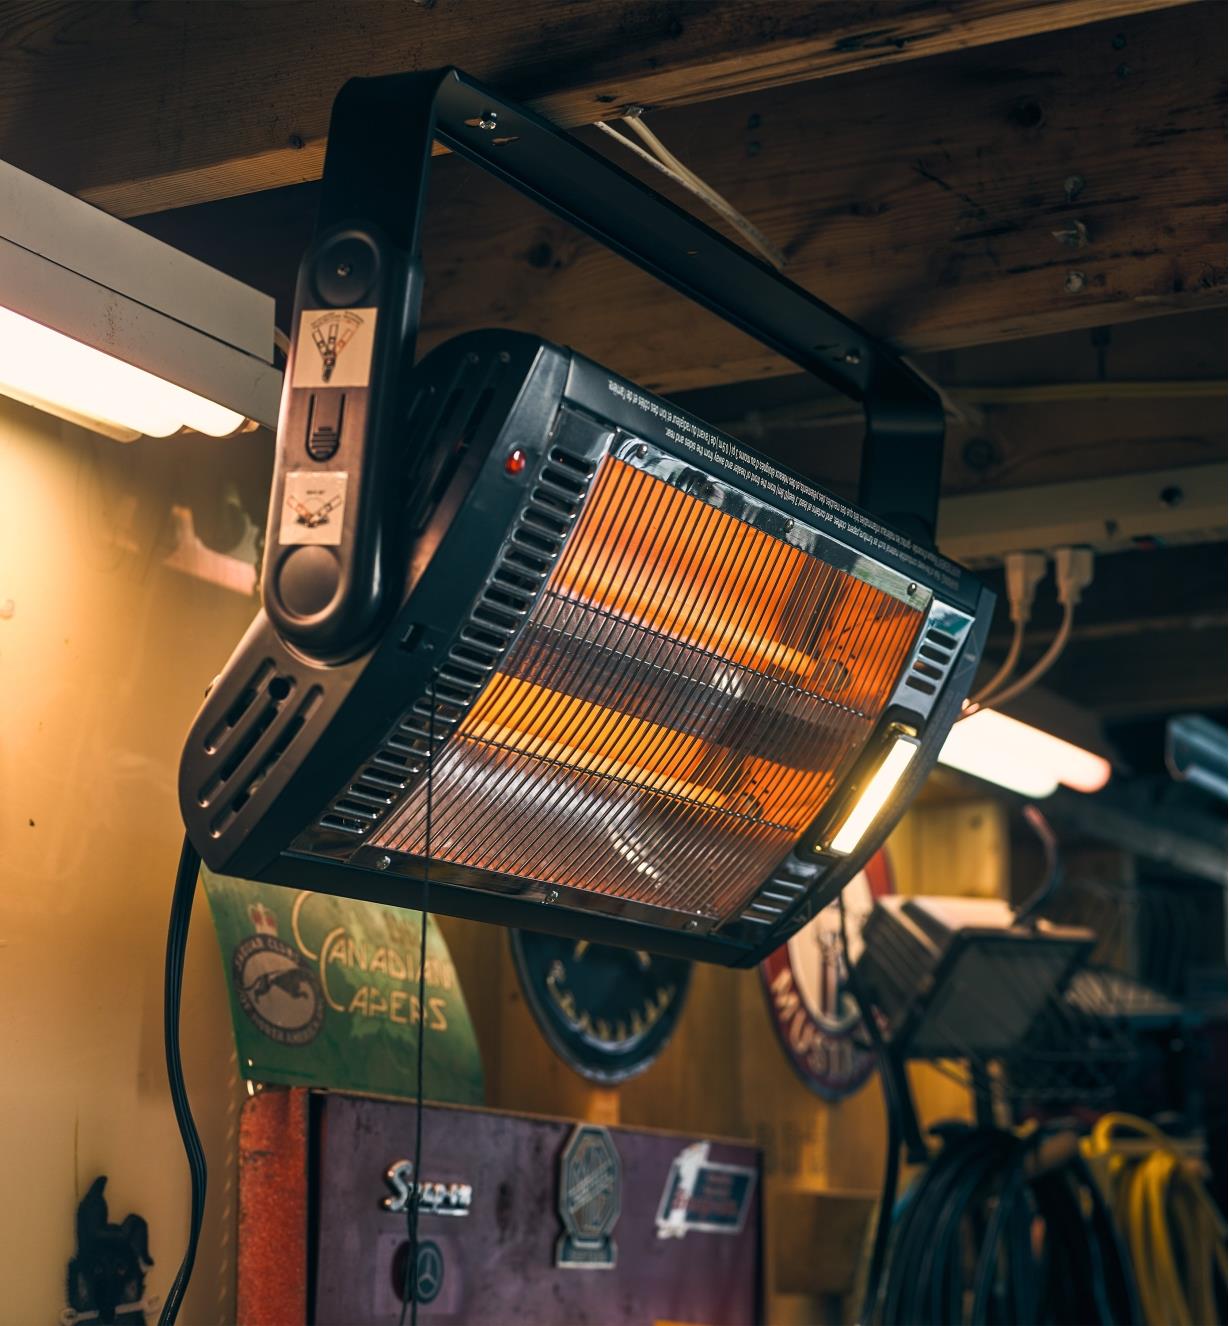 Quartz Overhead Radiant Heater suspended from a workshop ceiling